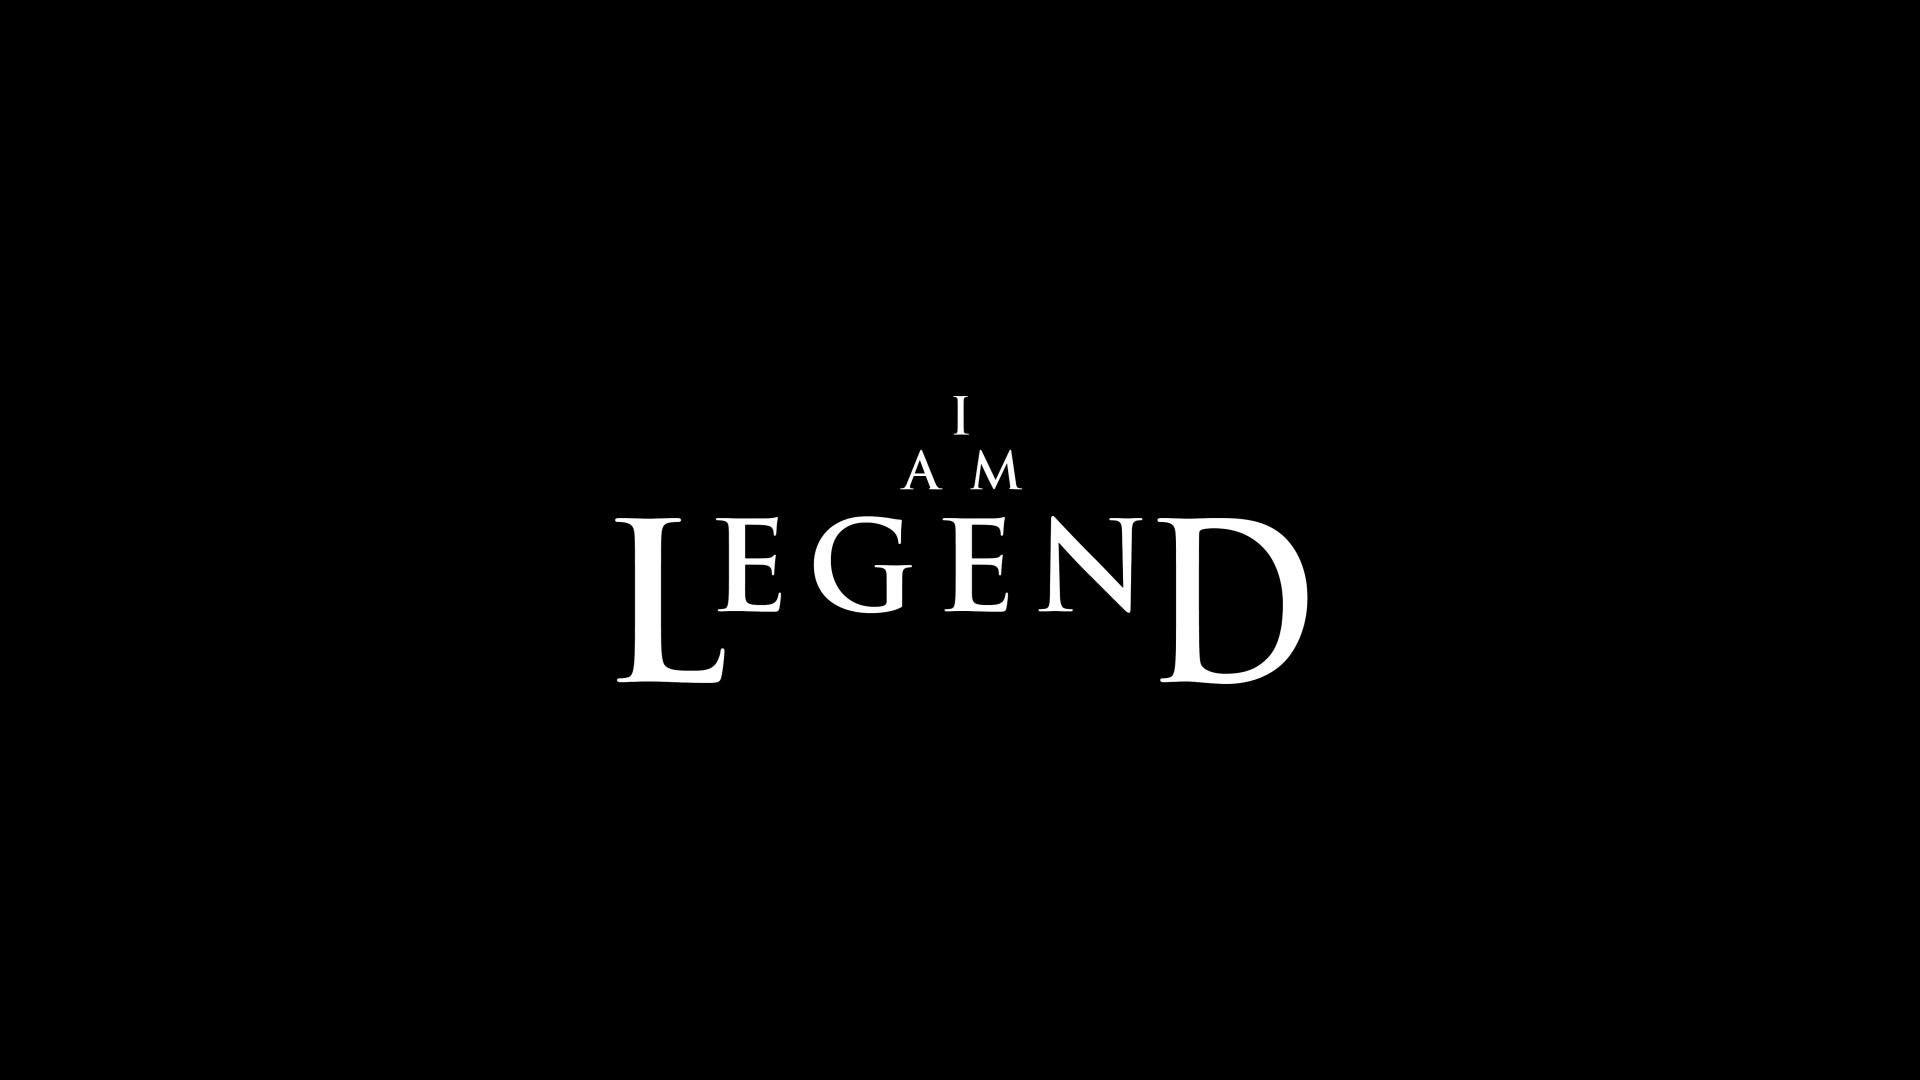 Download Legend wallpapers for mobile phone free Legend HD pictures